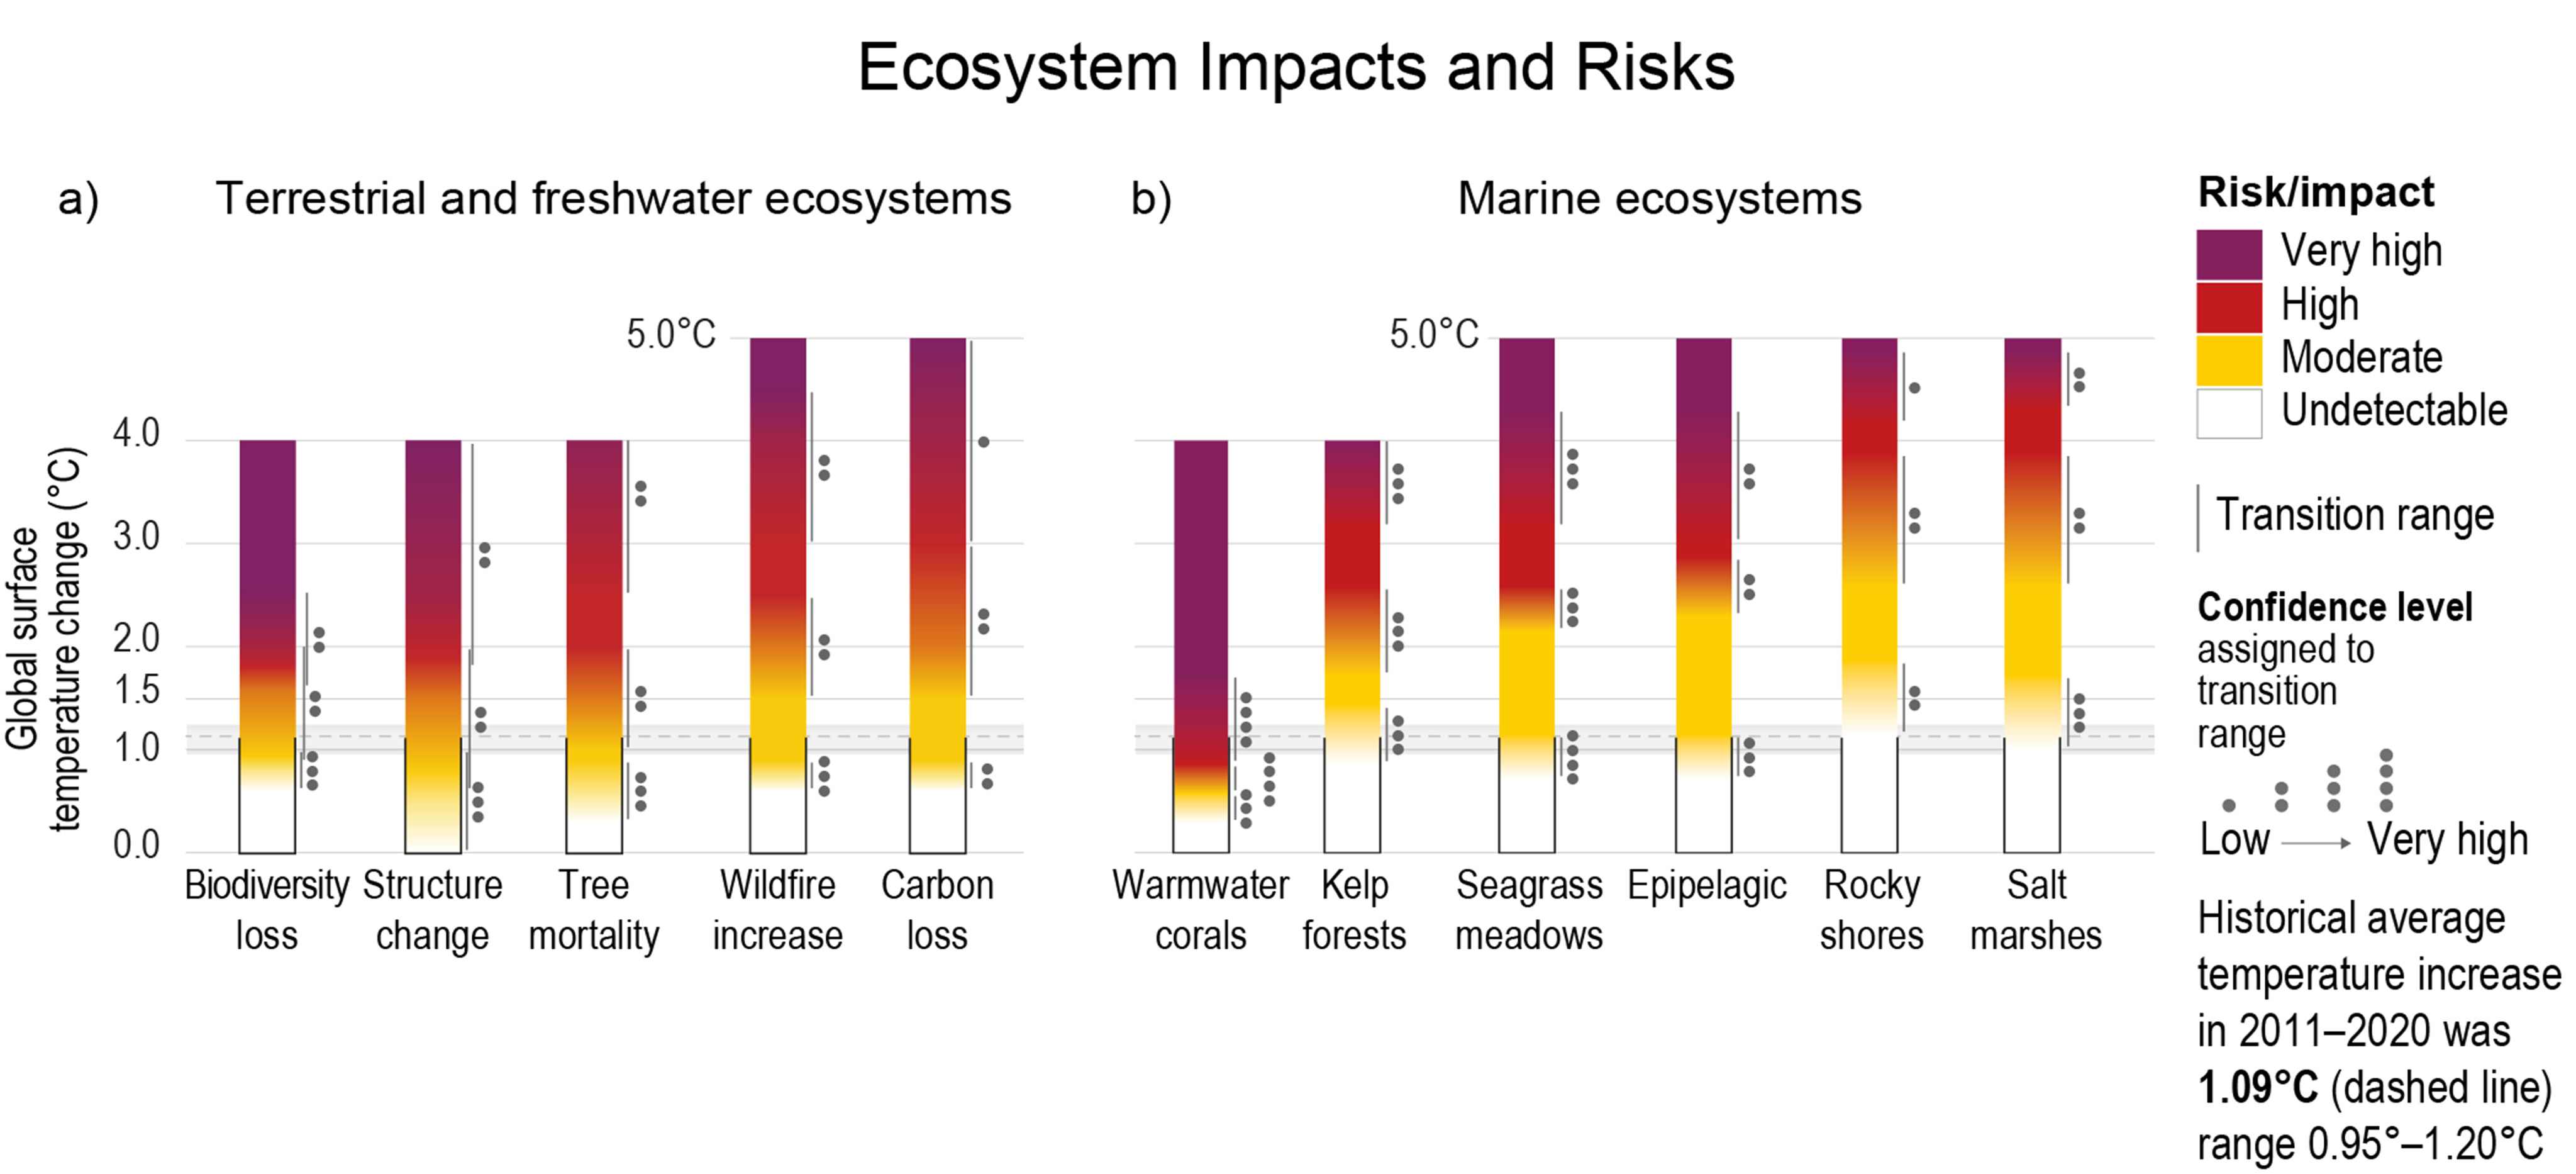 Ecosystem Impacts and Risks